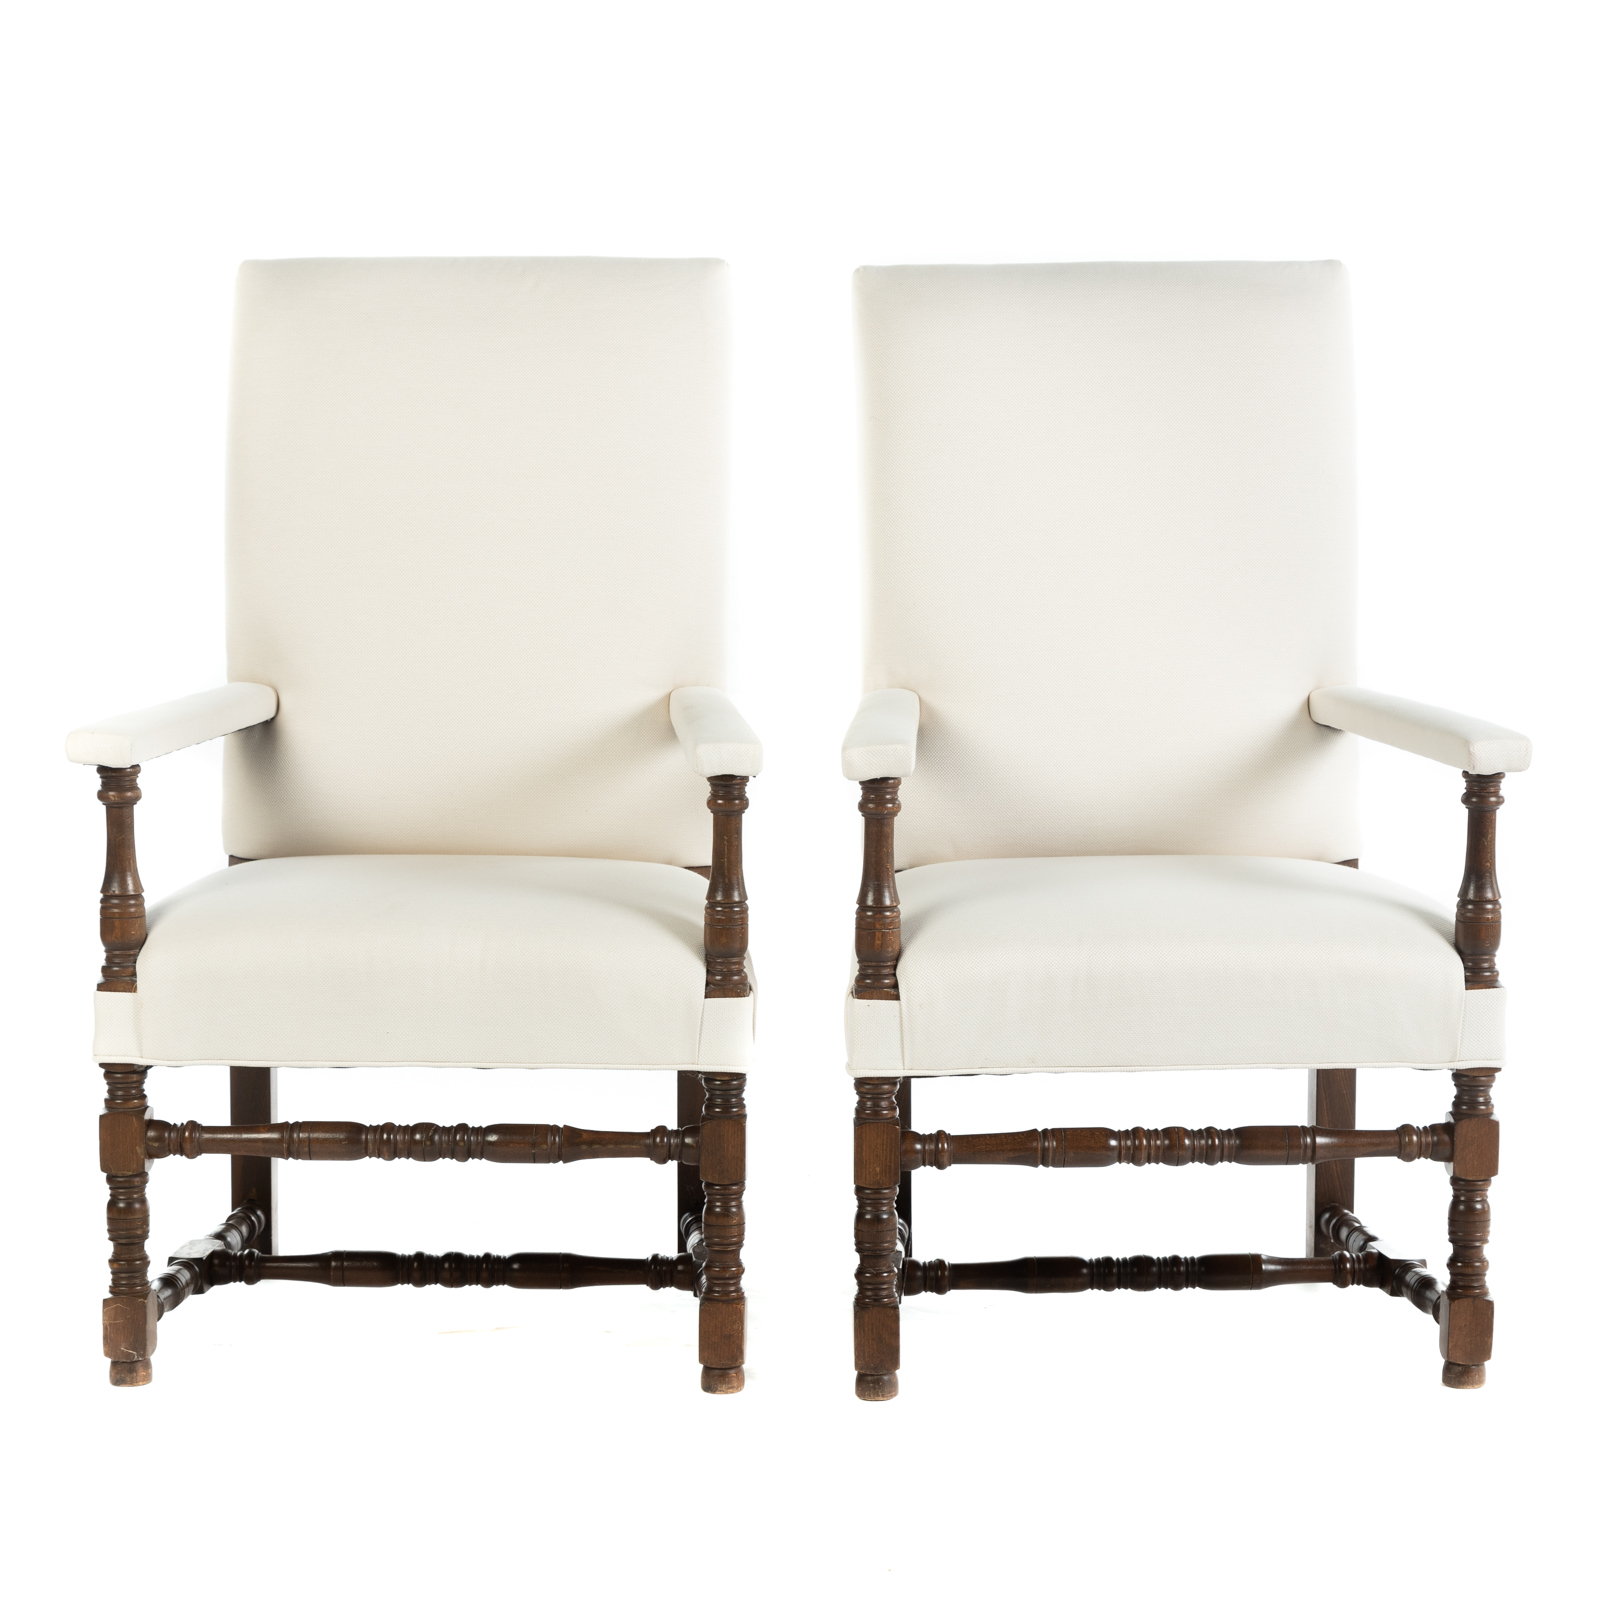 A PAIR OF JACOBEAN STYLE UPHOLSTERED 36a9bf